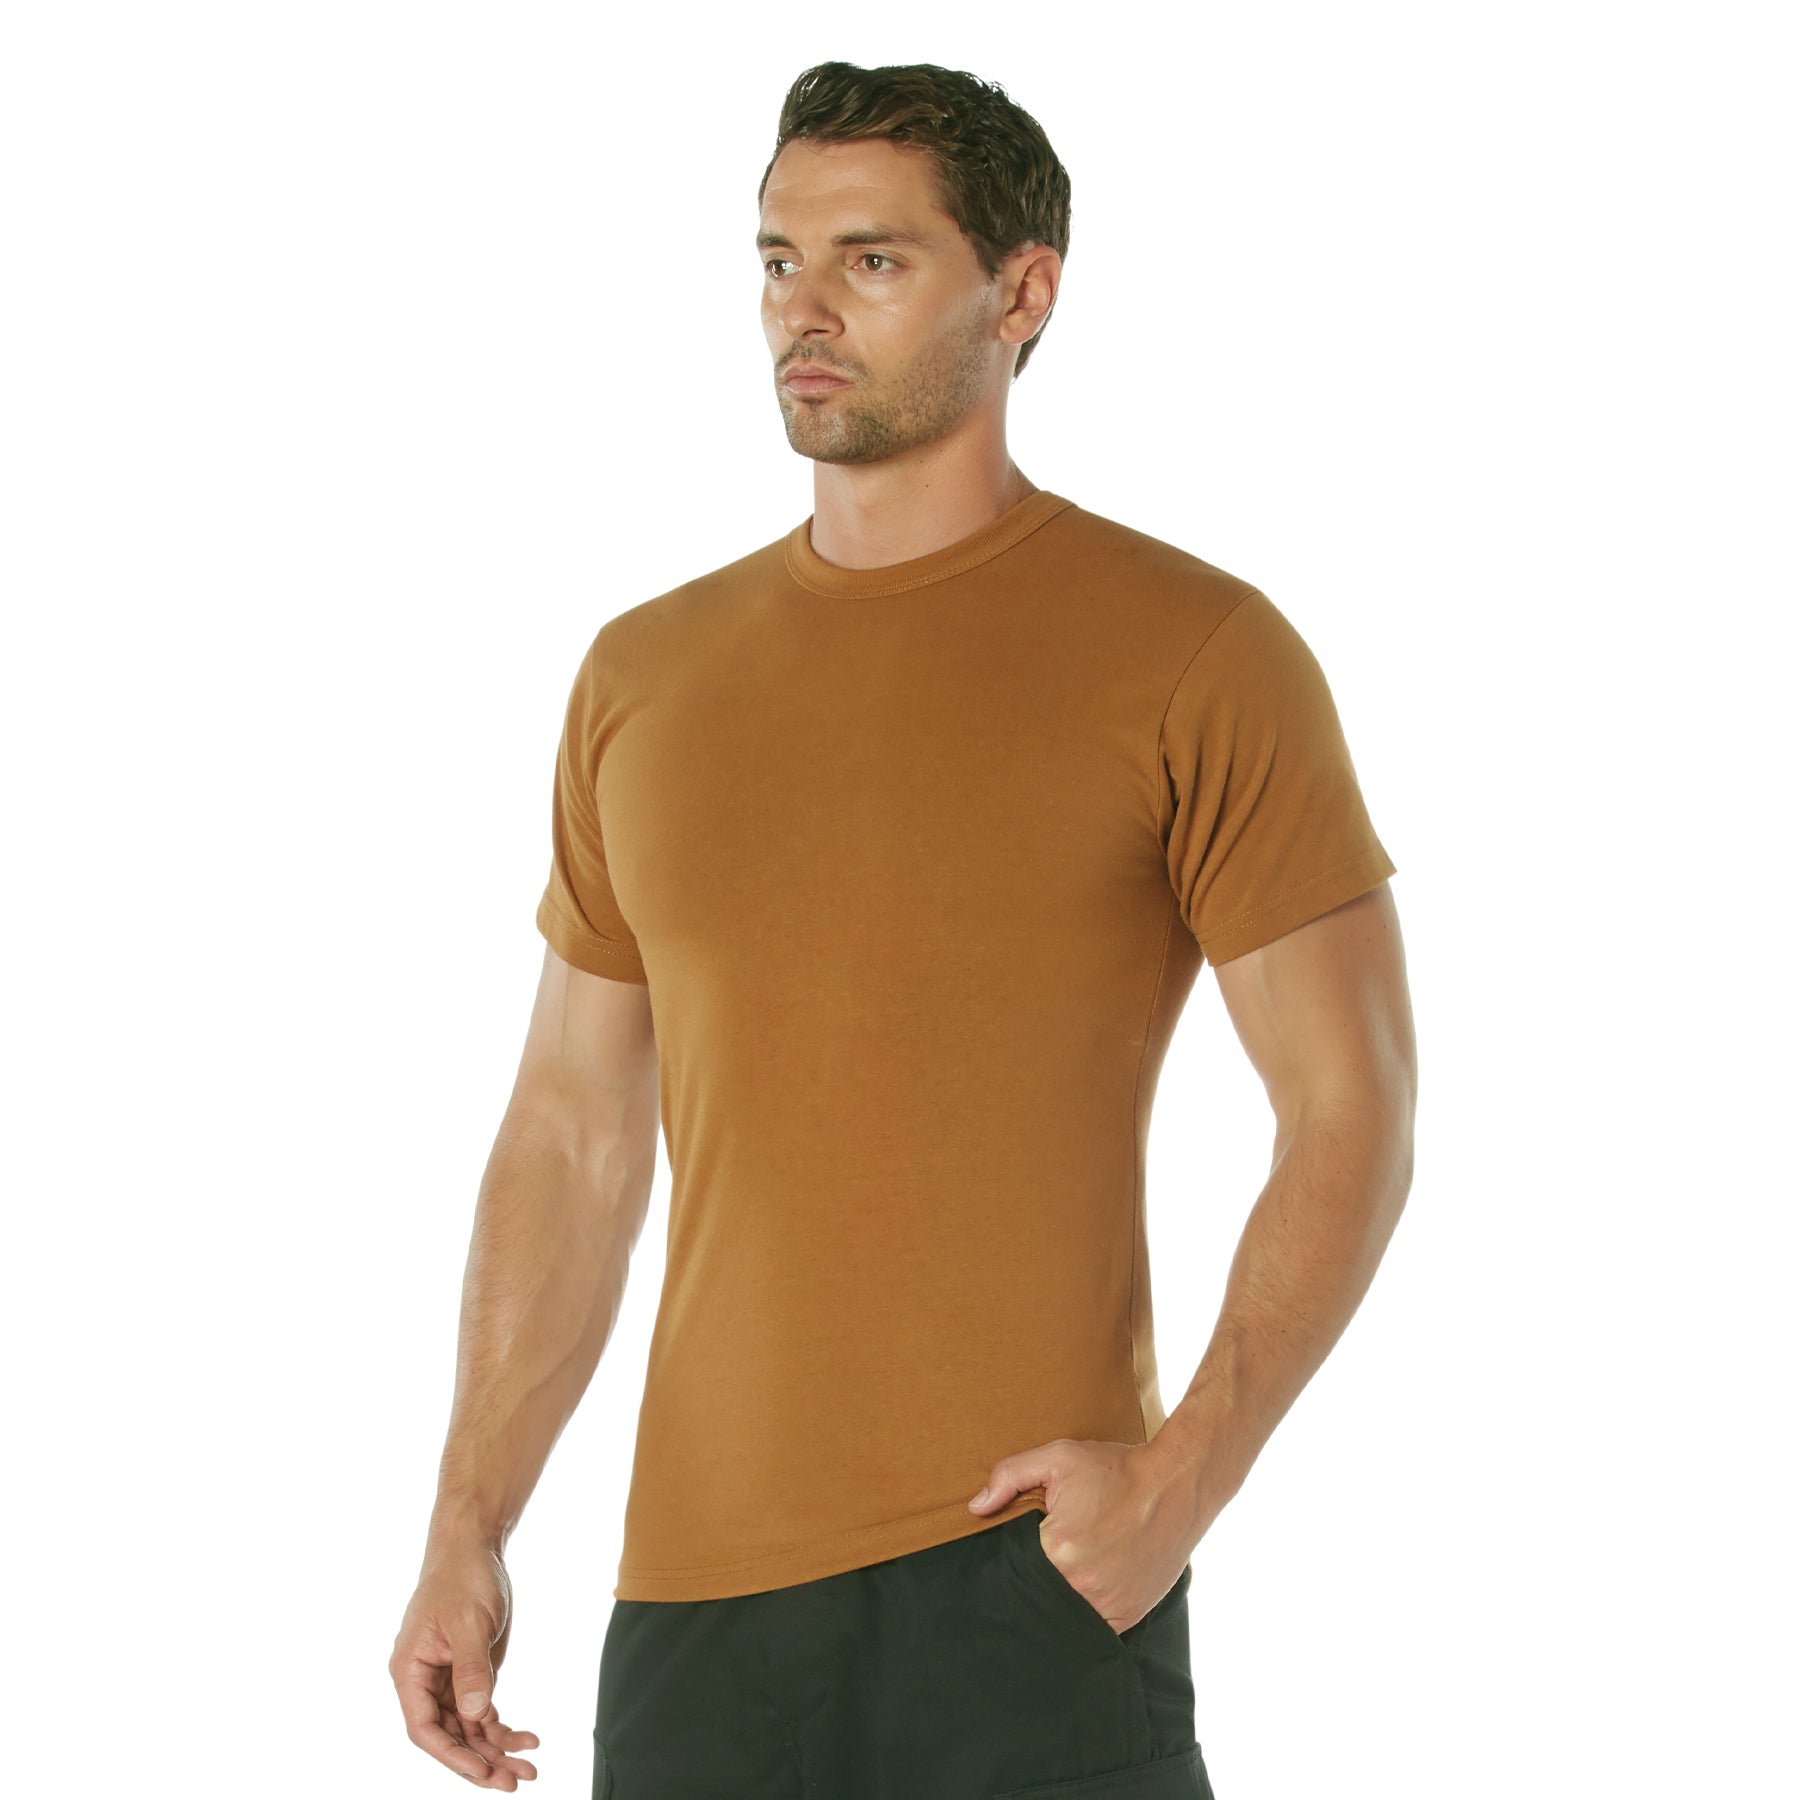 [AR 670-1] Poly/Cotton Heavyweight T-Shirts Work Brown